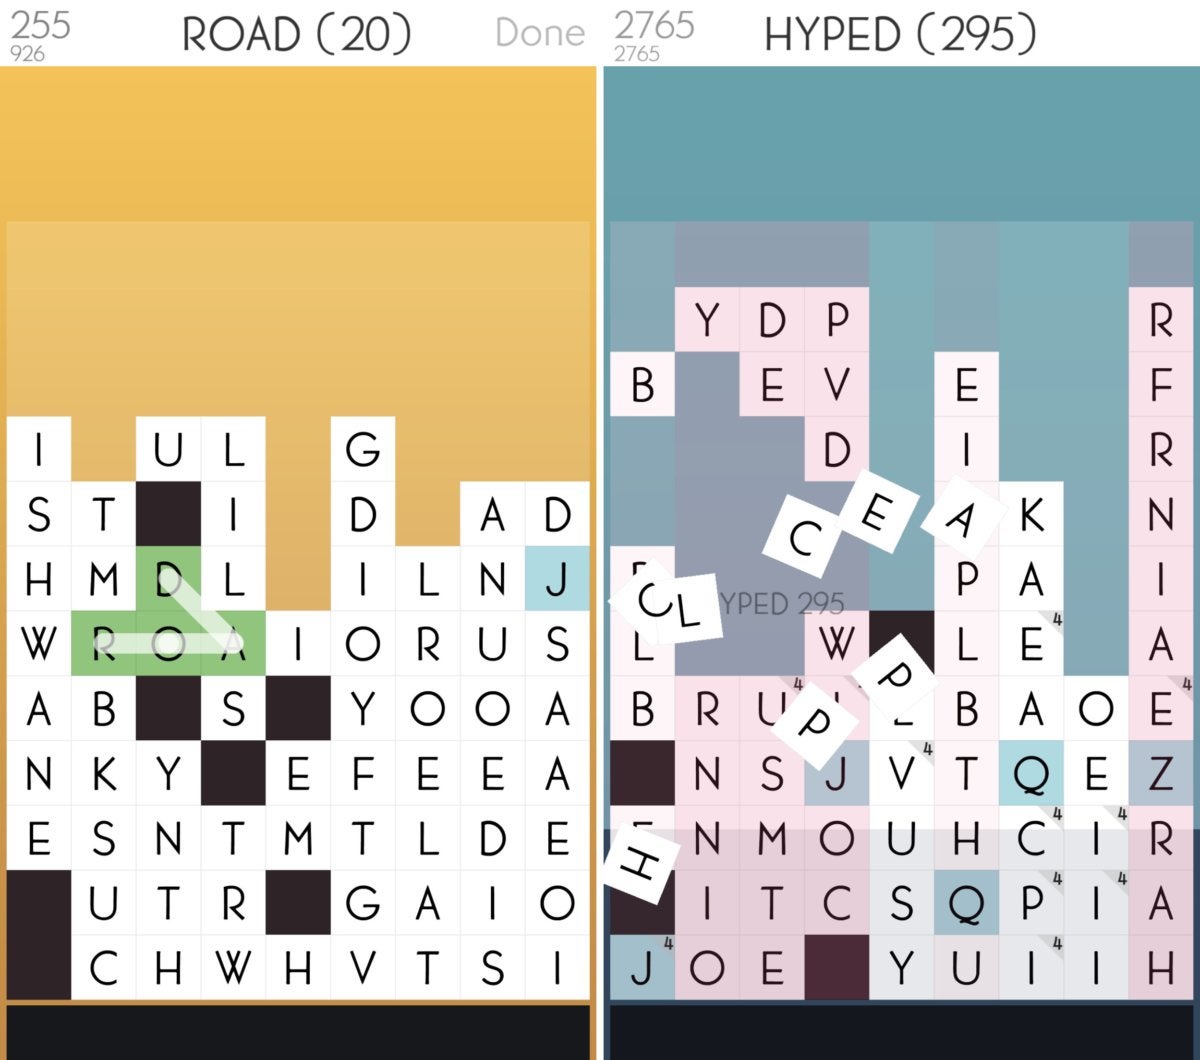 download the last version for ios Get the Word! - Words Game